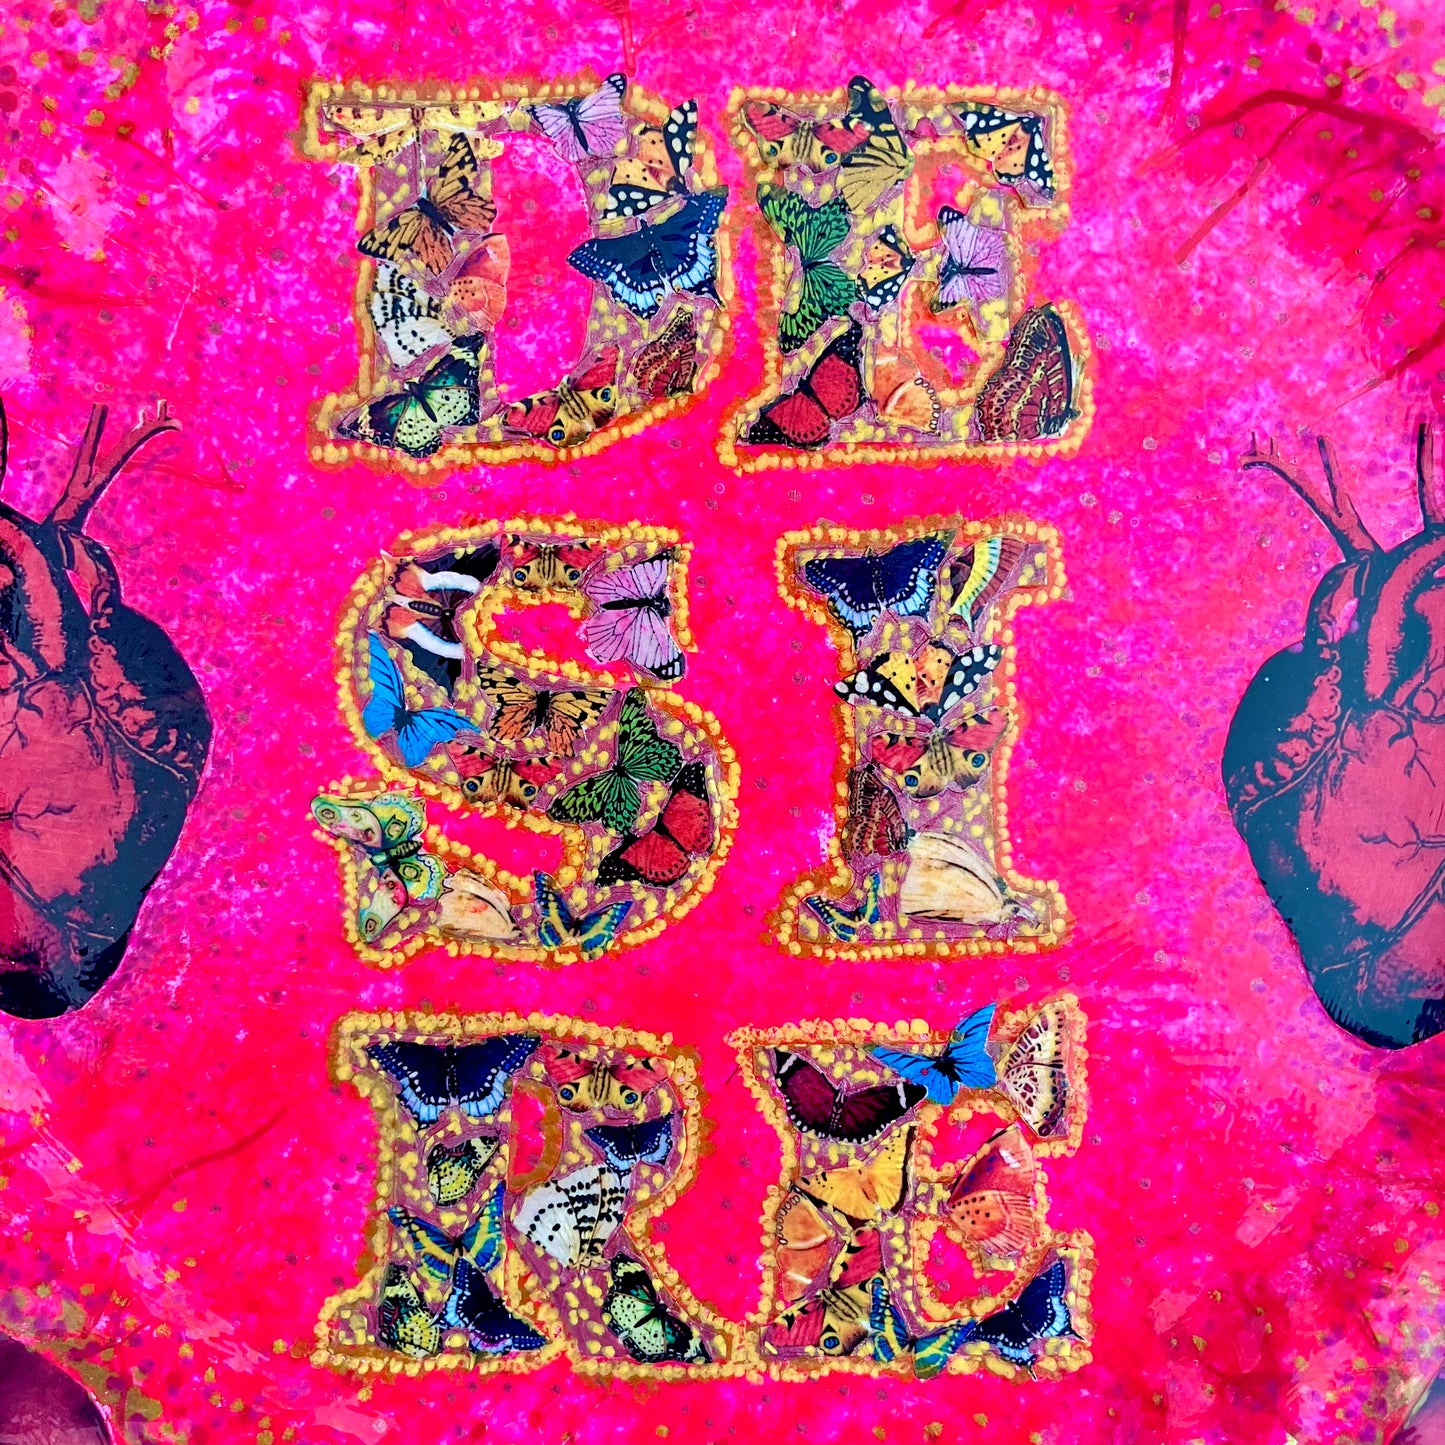 "Desire" Wall Plate by House of Frisson, featuring a collage with the word "desire" written with moths, and a frame of red roses and green lizards, on a hot pink background. Closeup showing moths forming the word "desire".